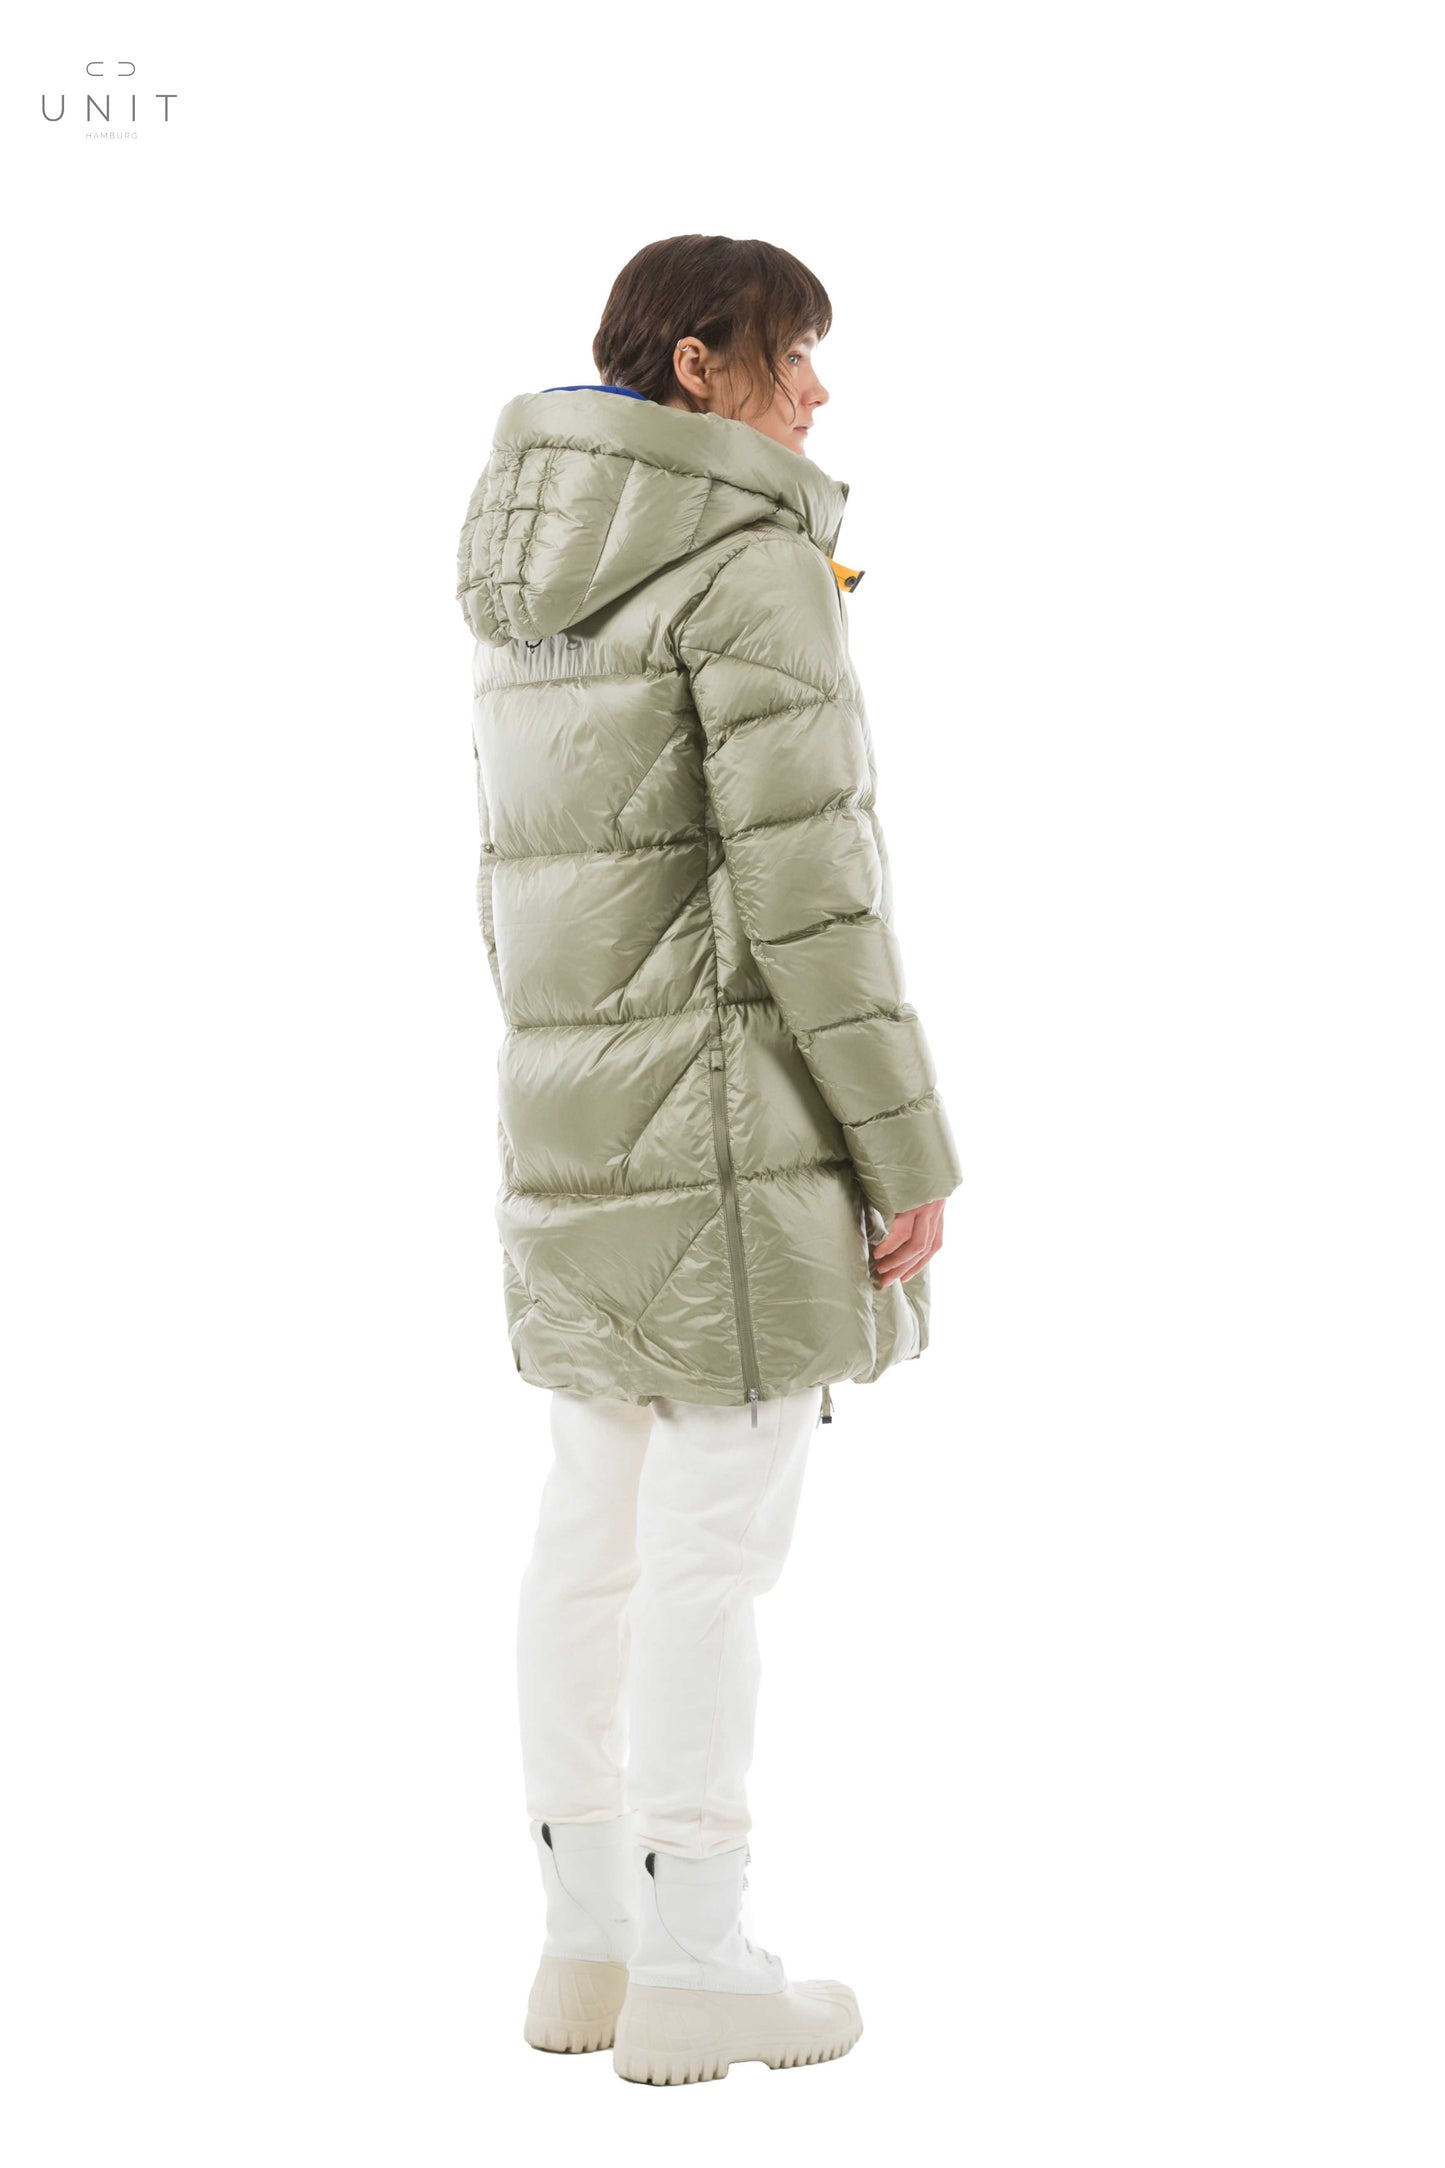 Parajumpers JANET - Woman, Hooded Down Jacket, sand, online only Parajumpers